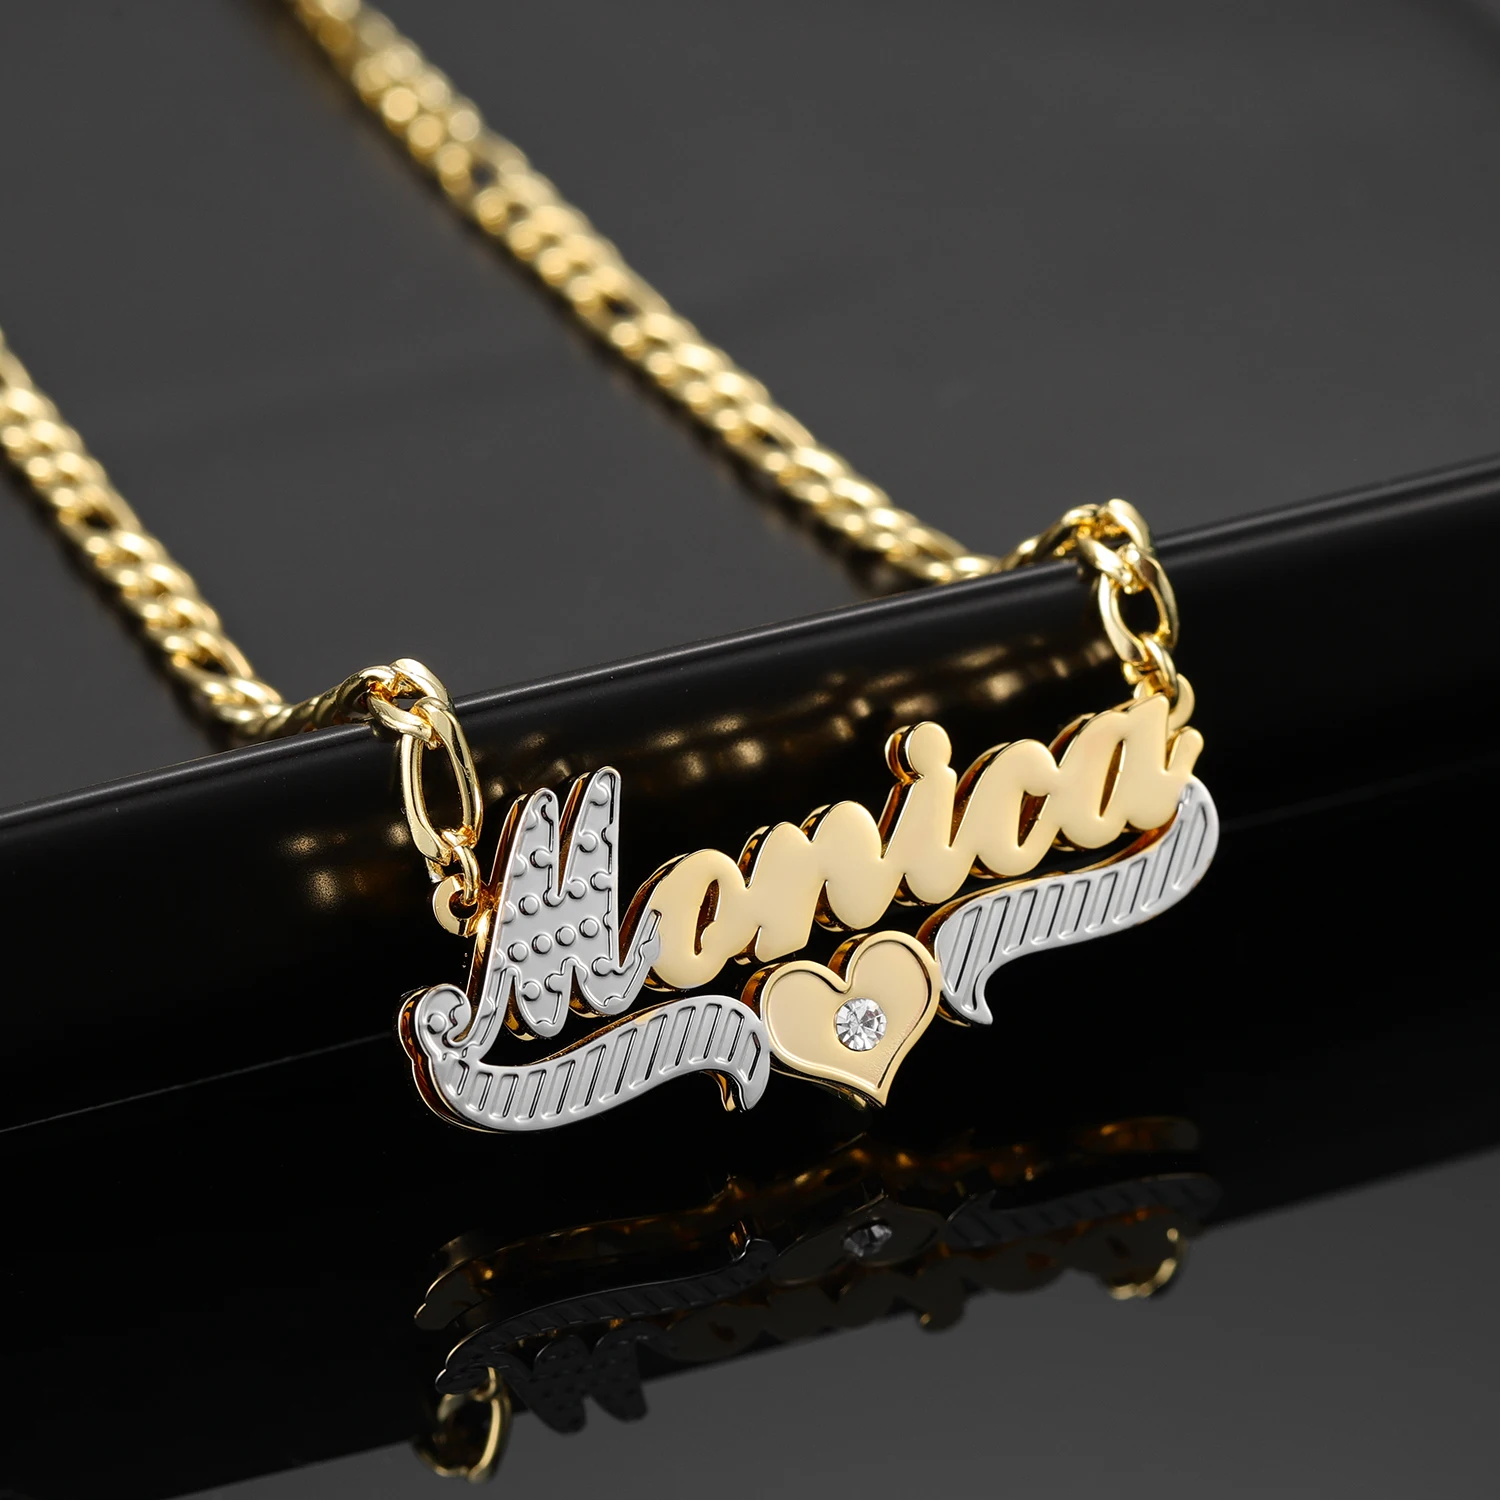 New Customized Double Plate Two Tone Heart Name Necklace Personalized Crystal Name Necklace Stainless Steel Charm Jewelry Women